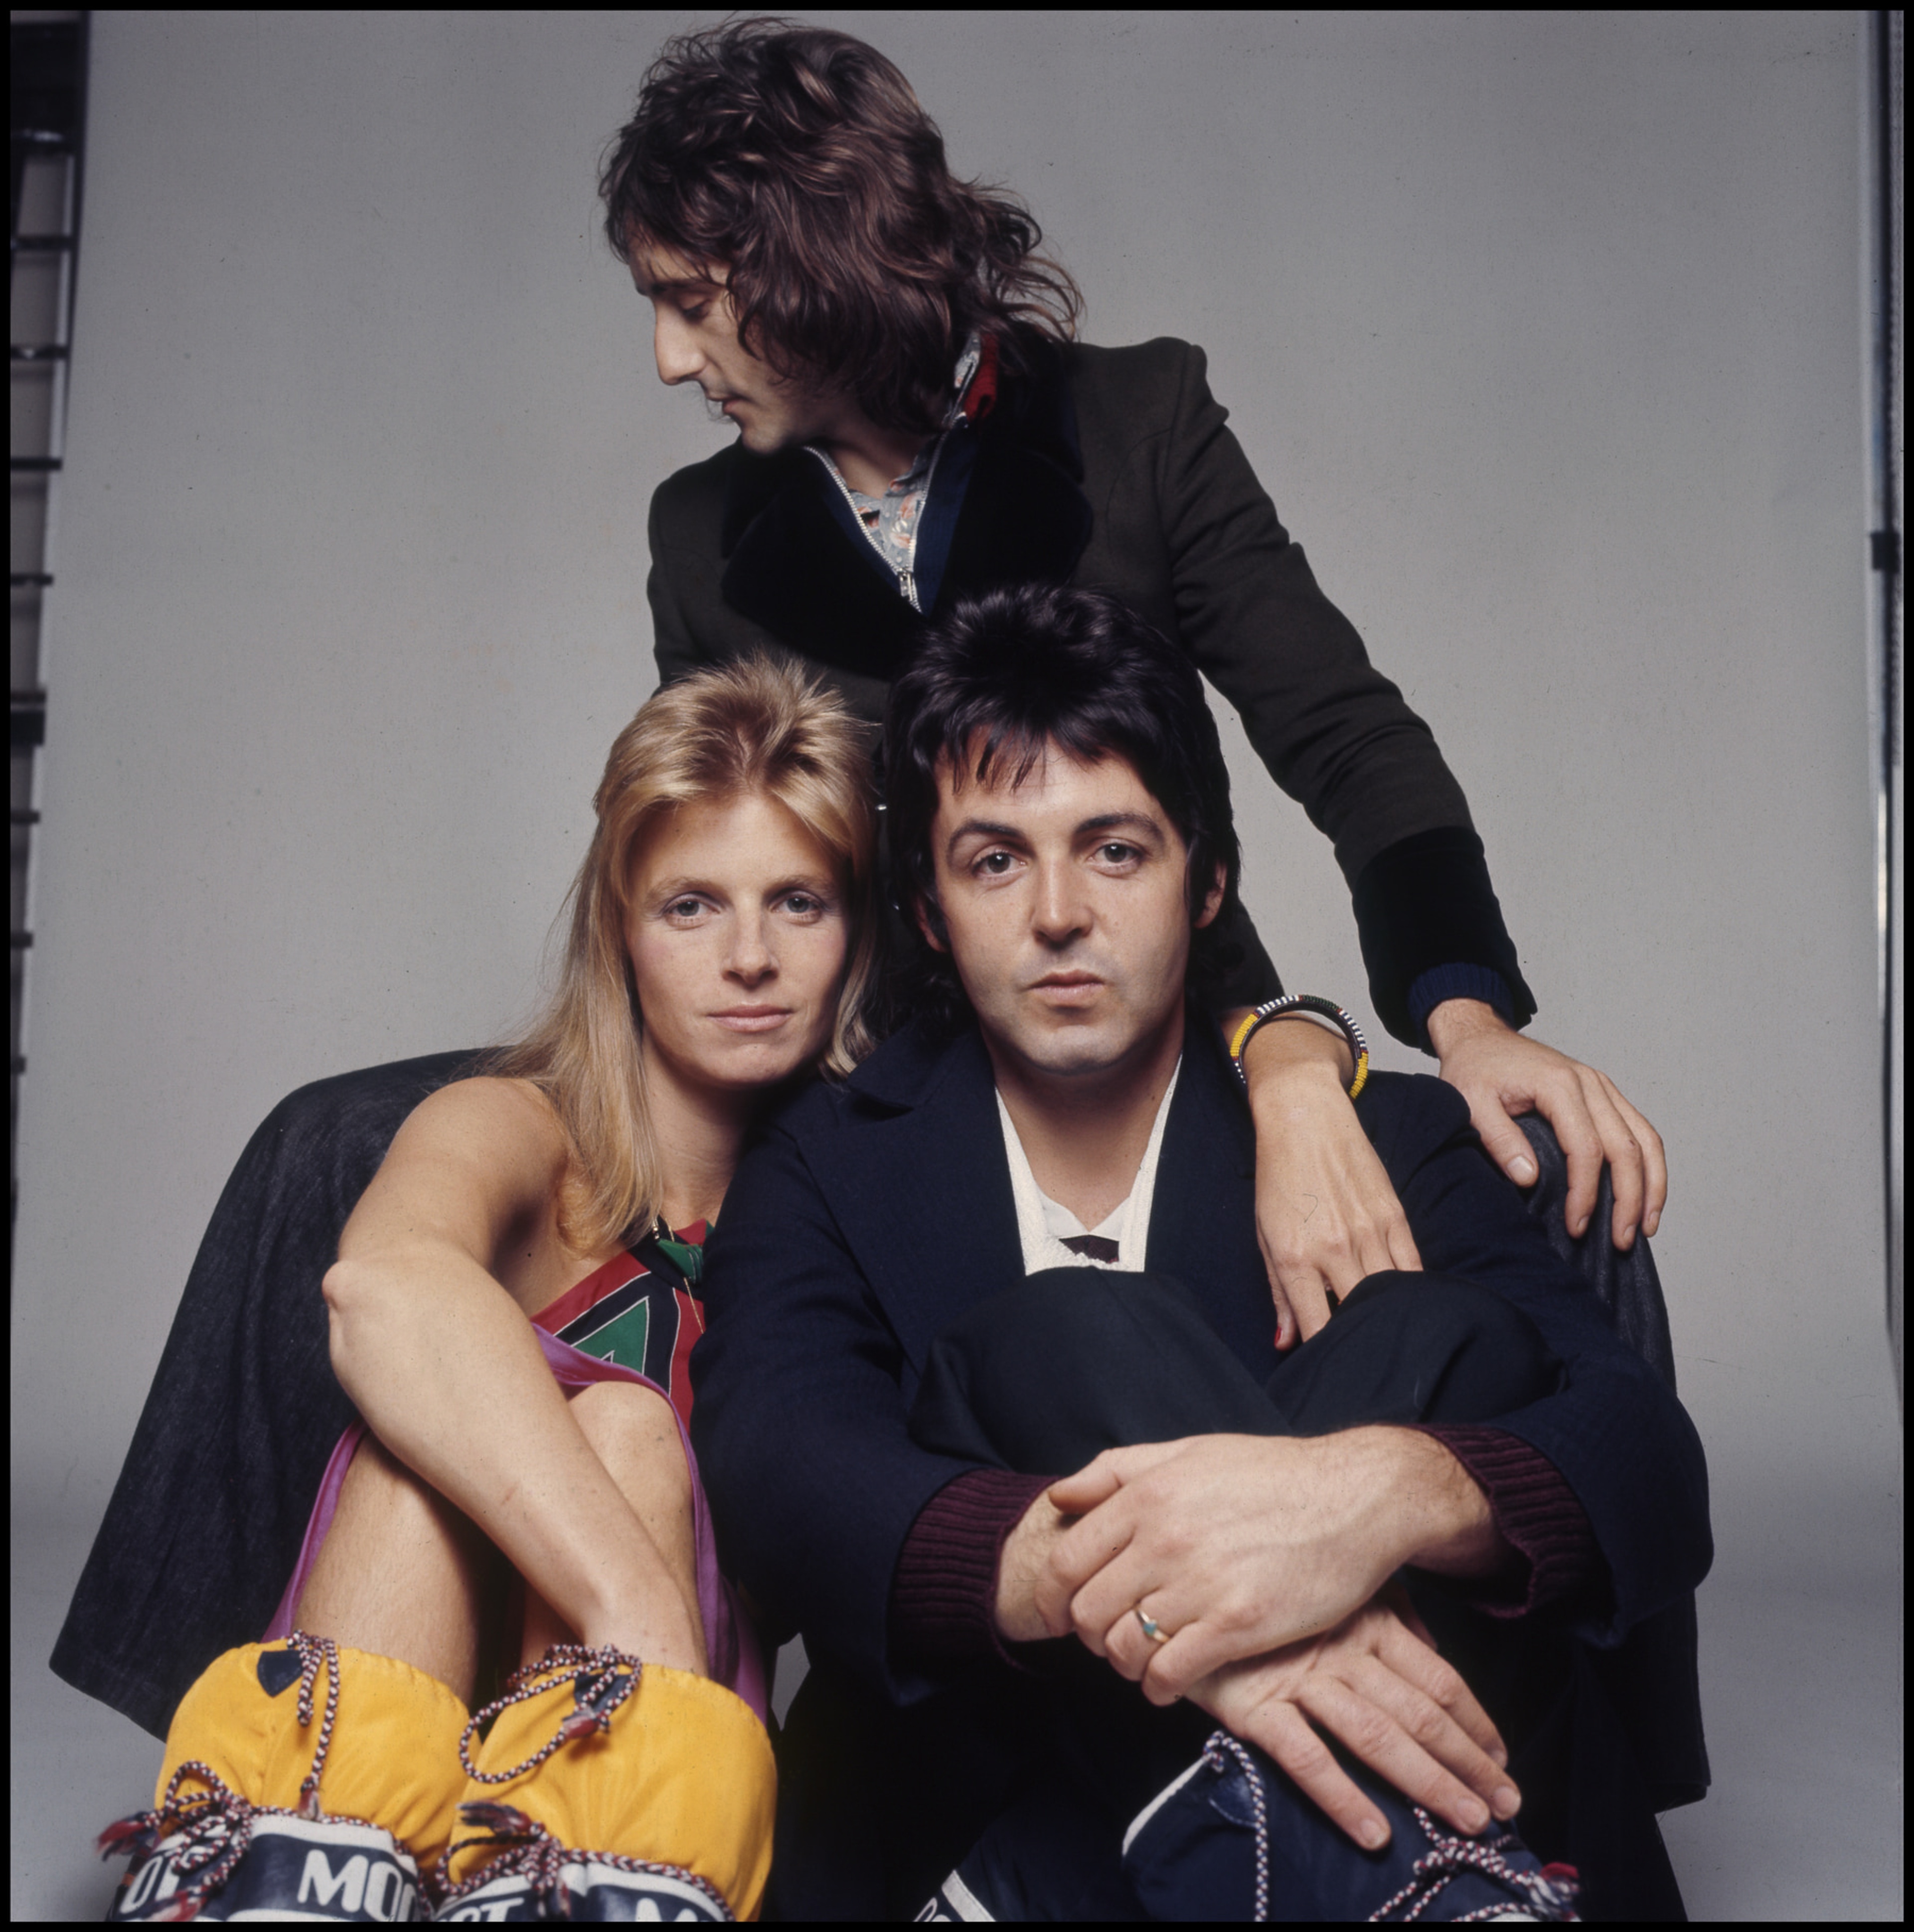 Denny Laine, Paul and Linda sitting down in front of a grey background